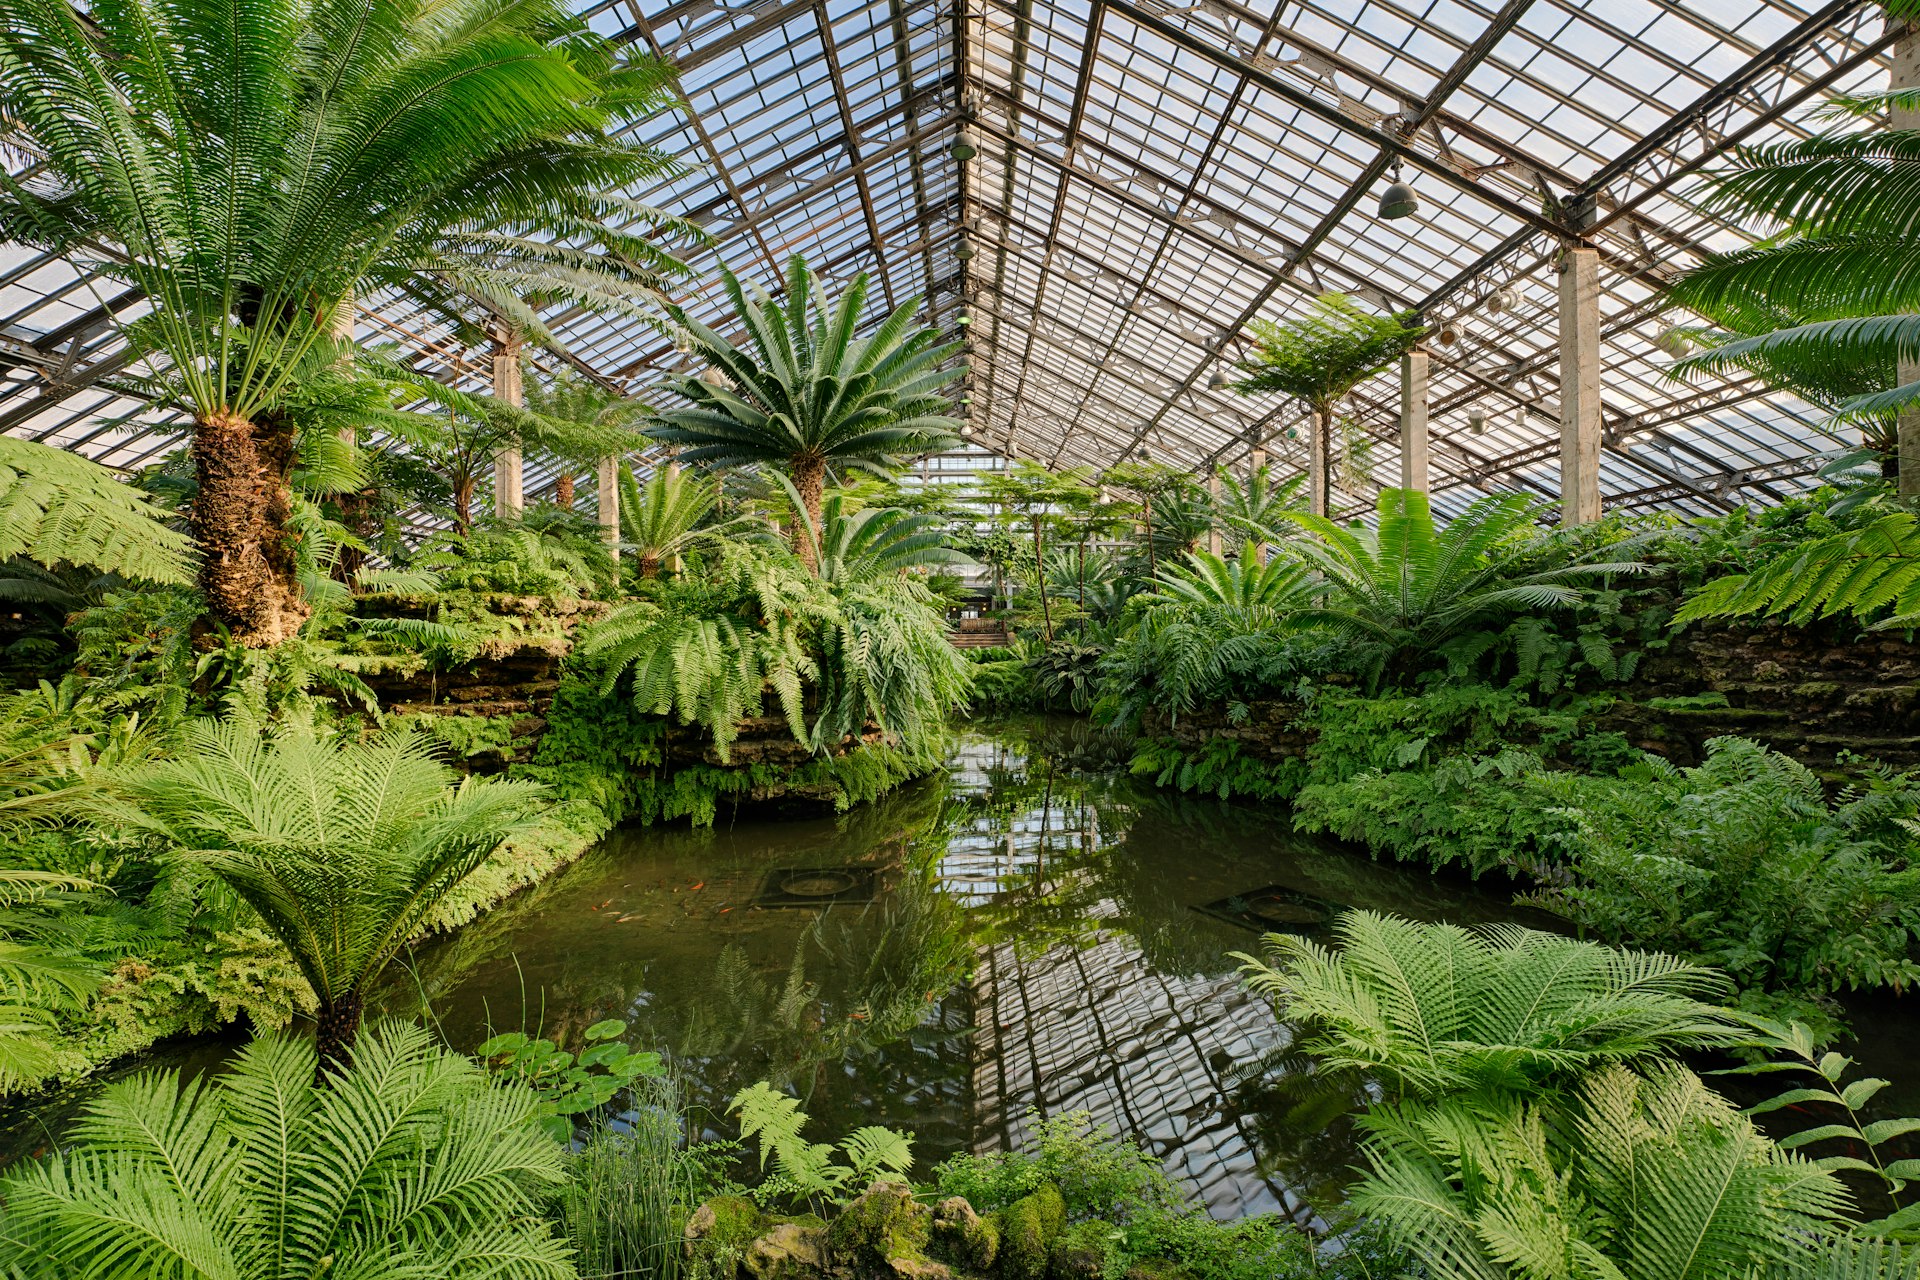 The Fern Room of the Garfield Park Conservatory